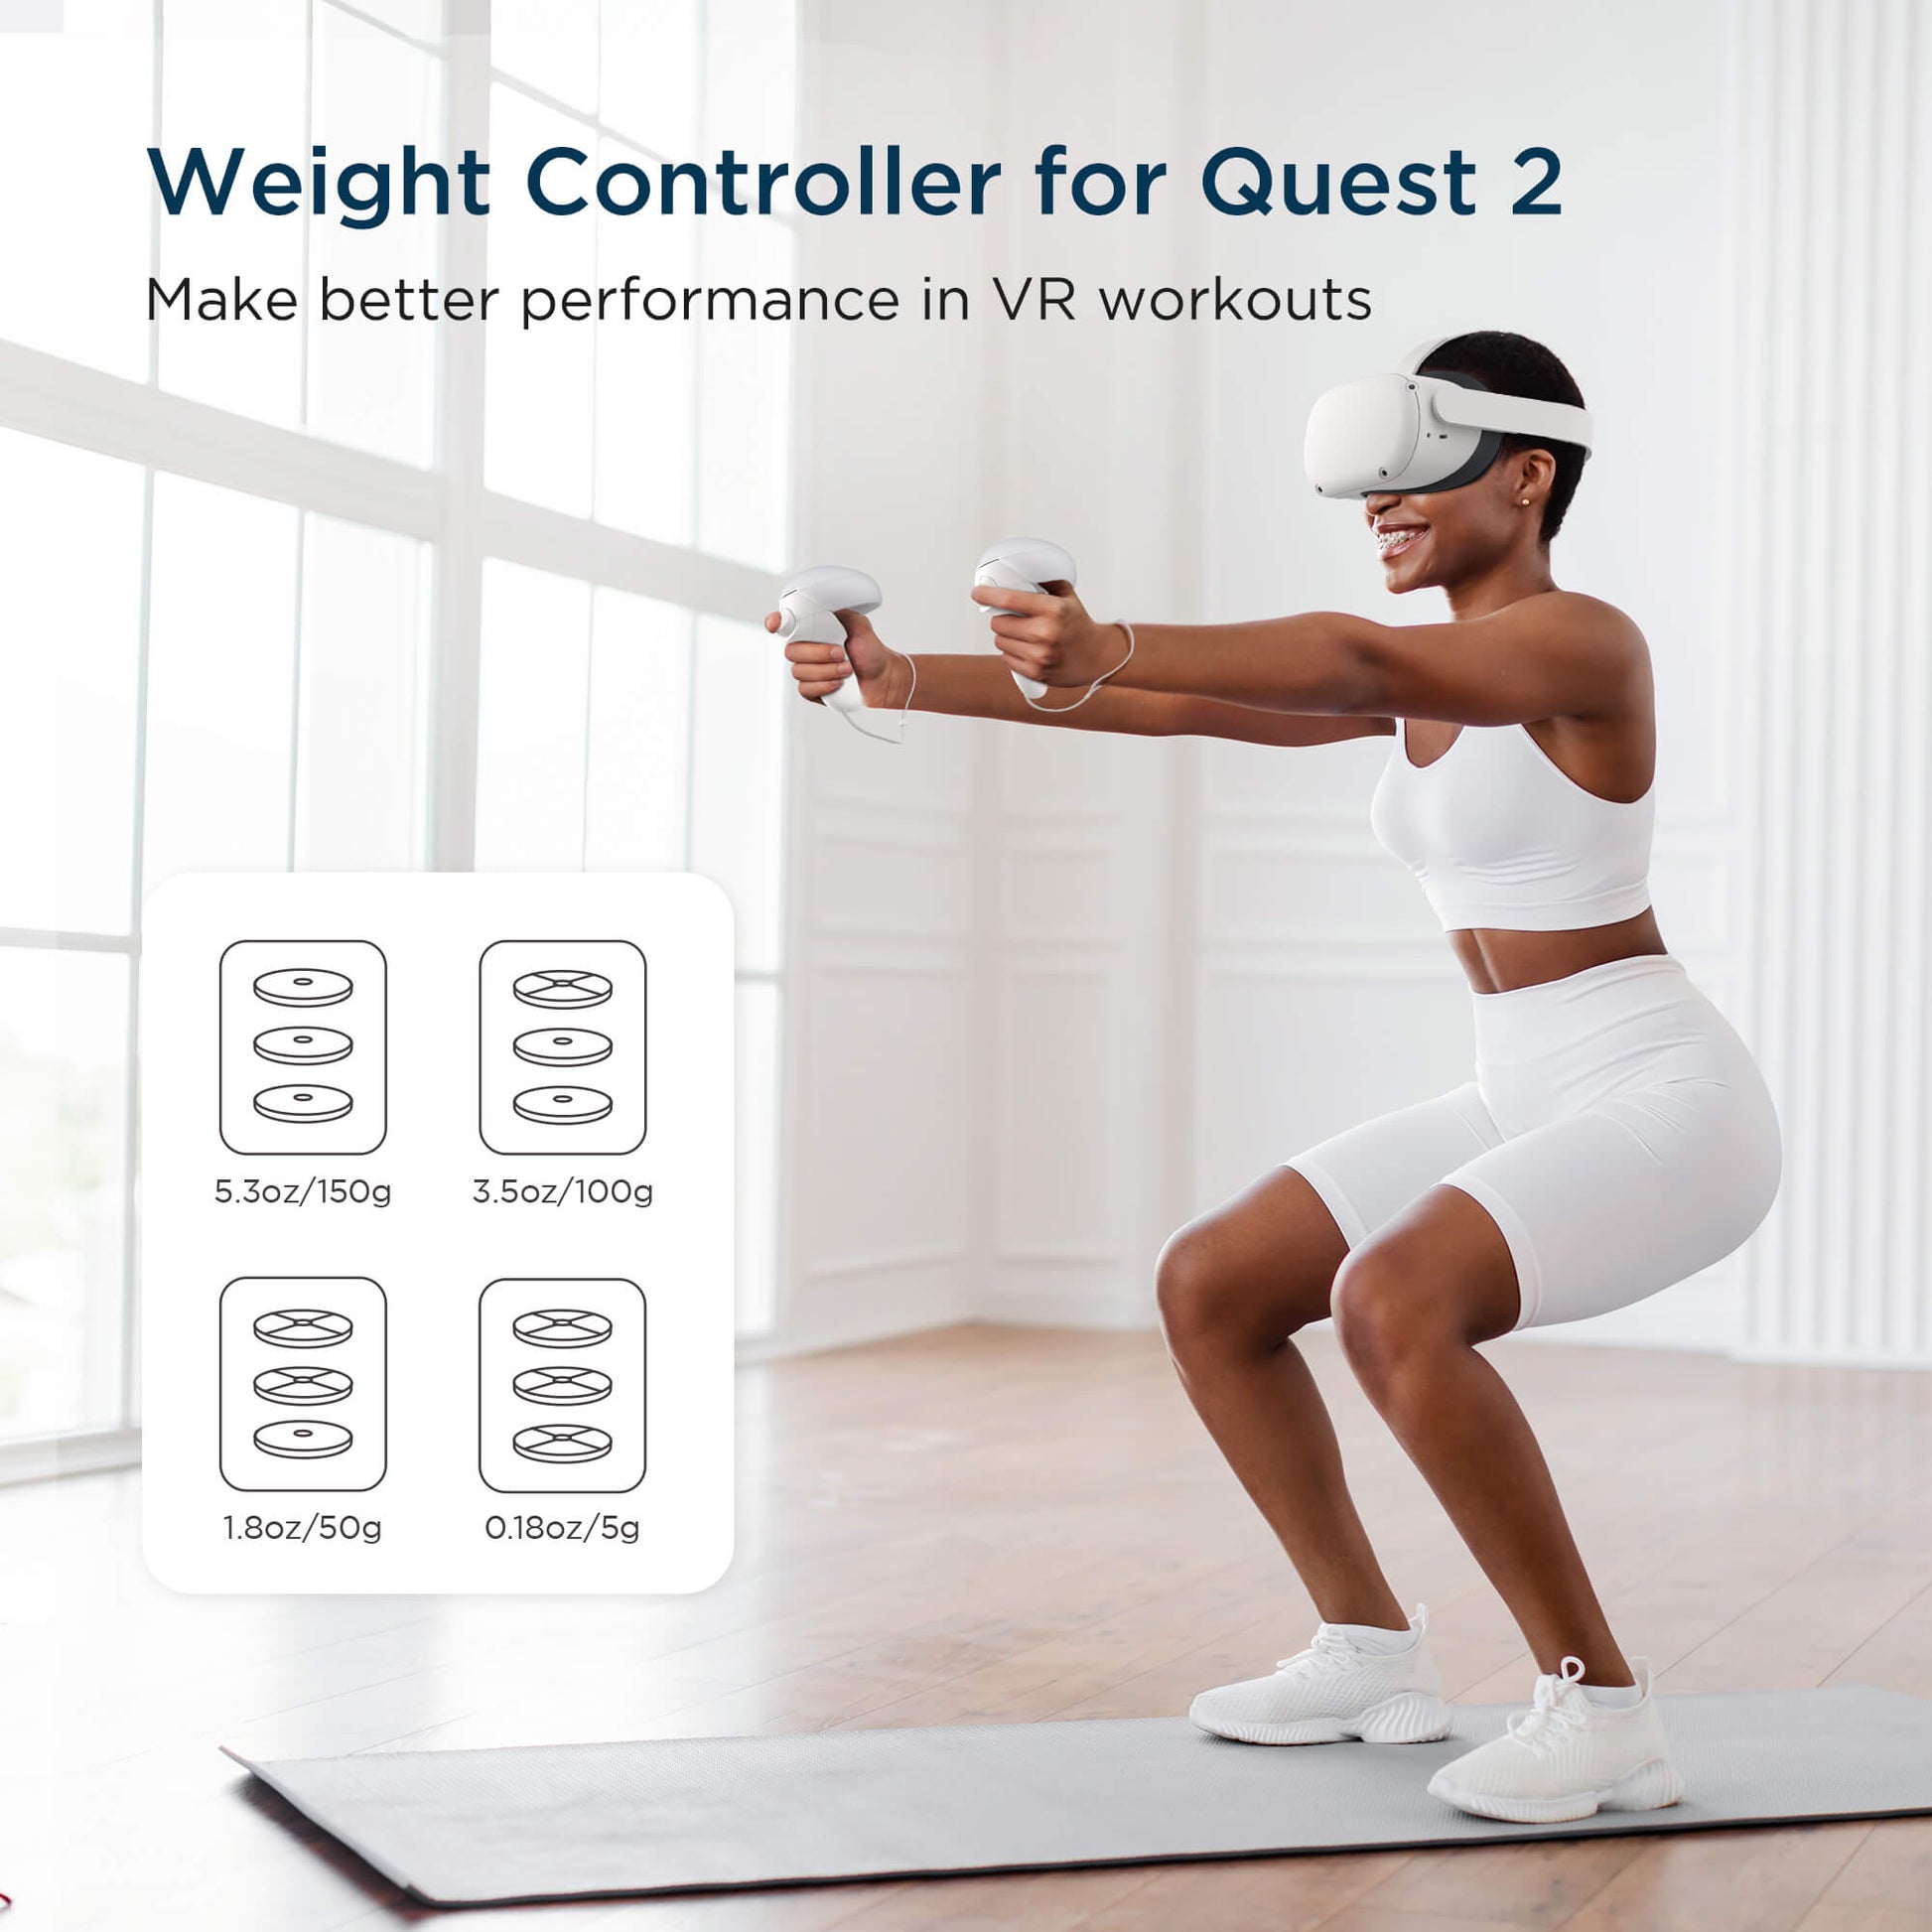 Quest 2 controller weights